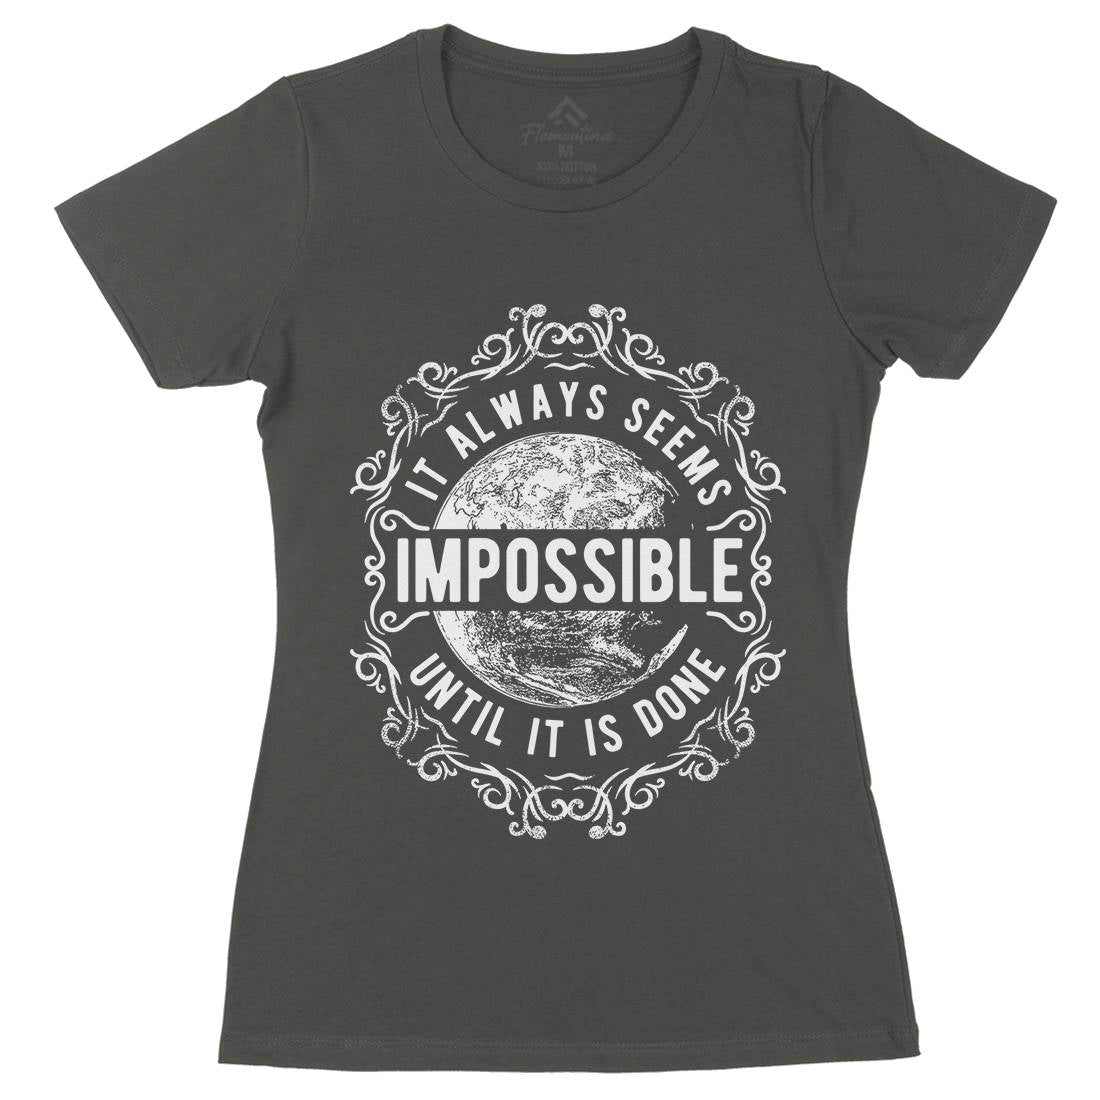 Always Seems Impossible Womens Organic Crew Neck T-Shirt Quotes C900